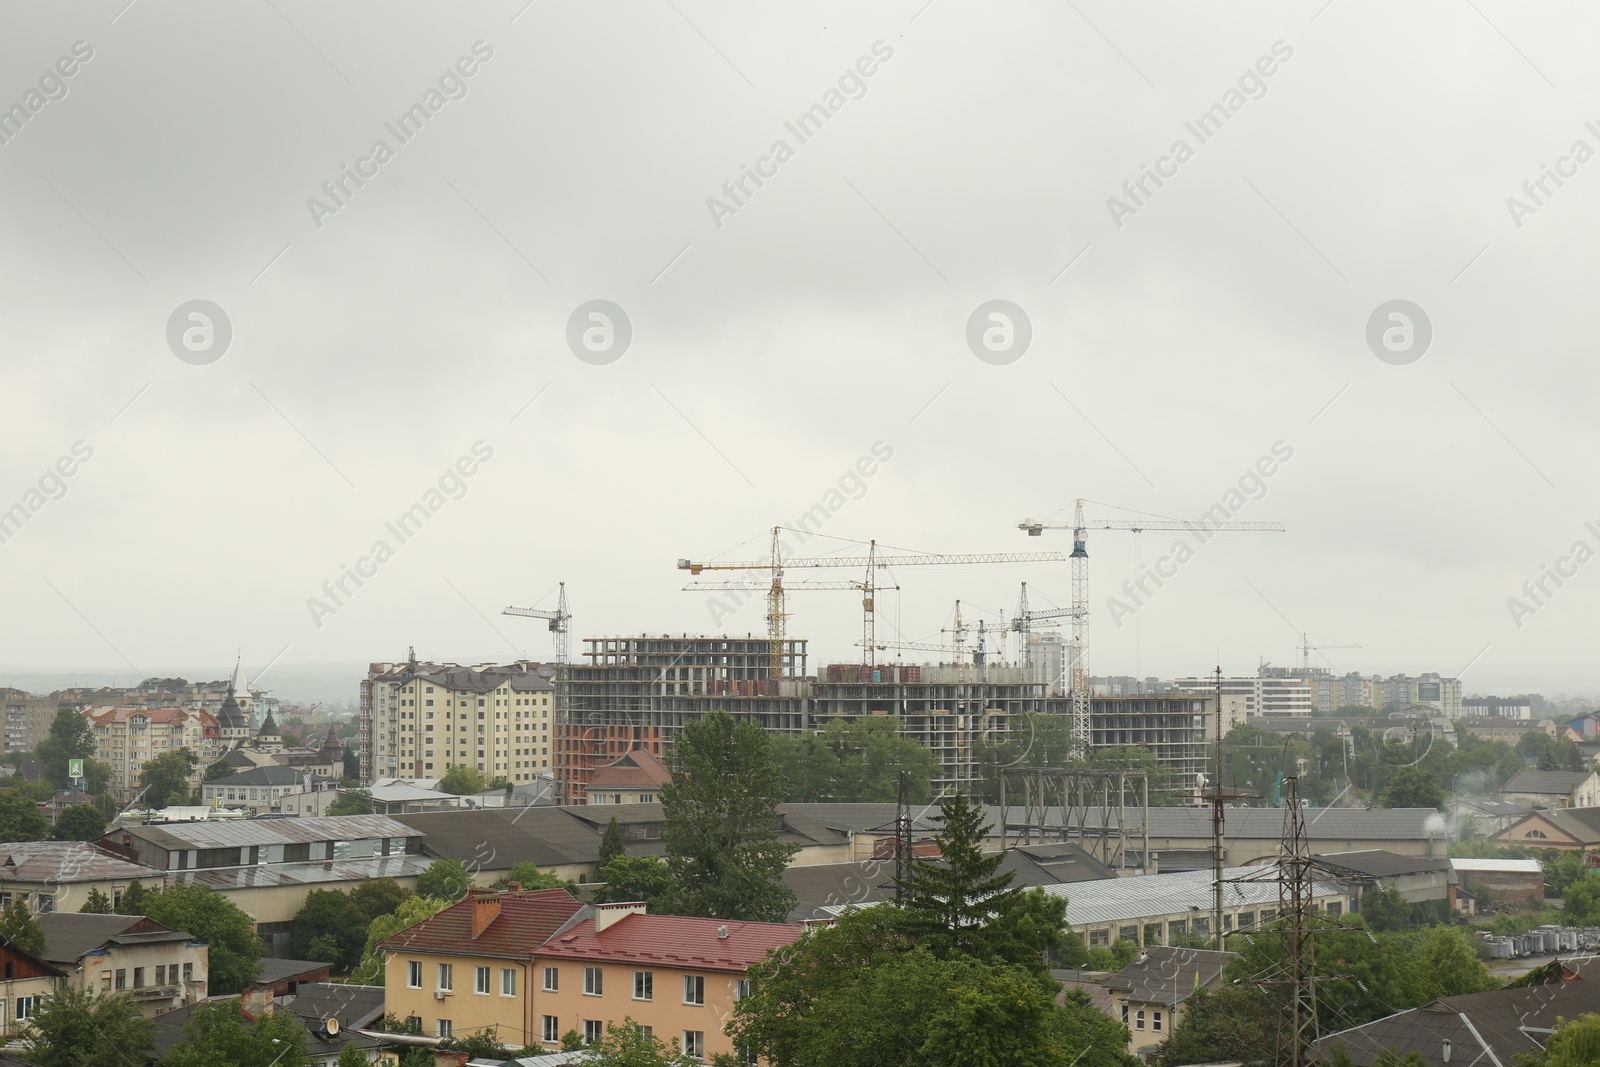 Photo of Picturesque view of city with buildings and construction cranes on cloudy day